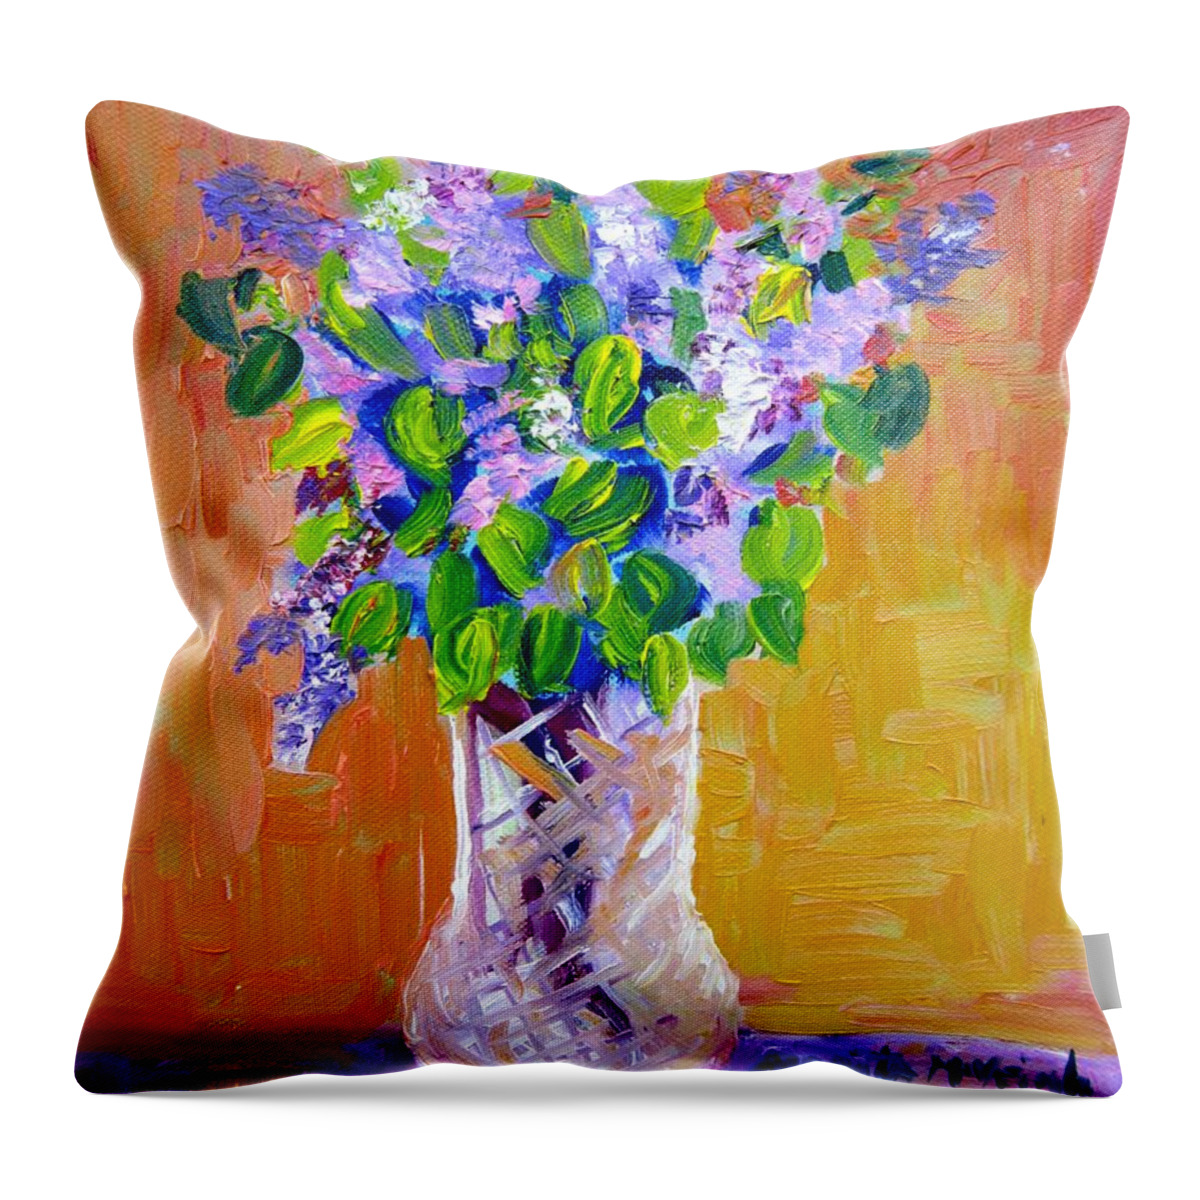 Lilac Throw Pillow featuring the painting Lilac Bouquet by Marita McVeigh